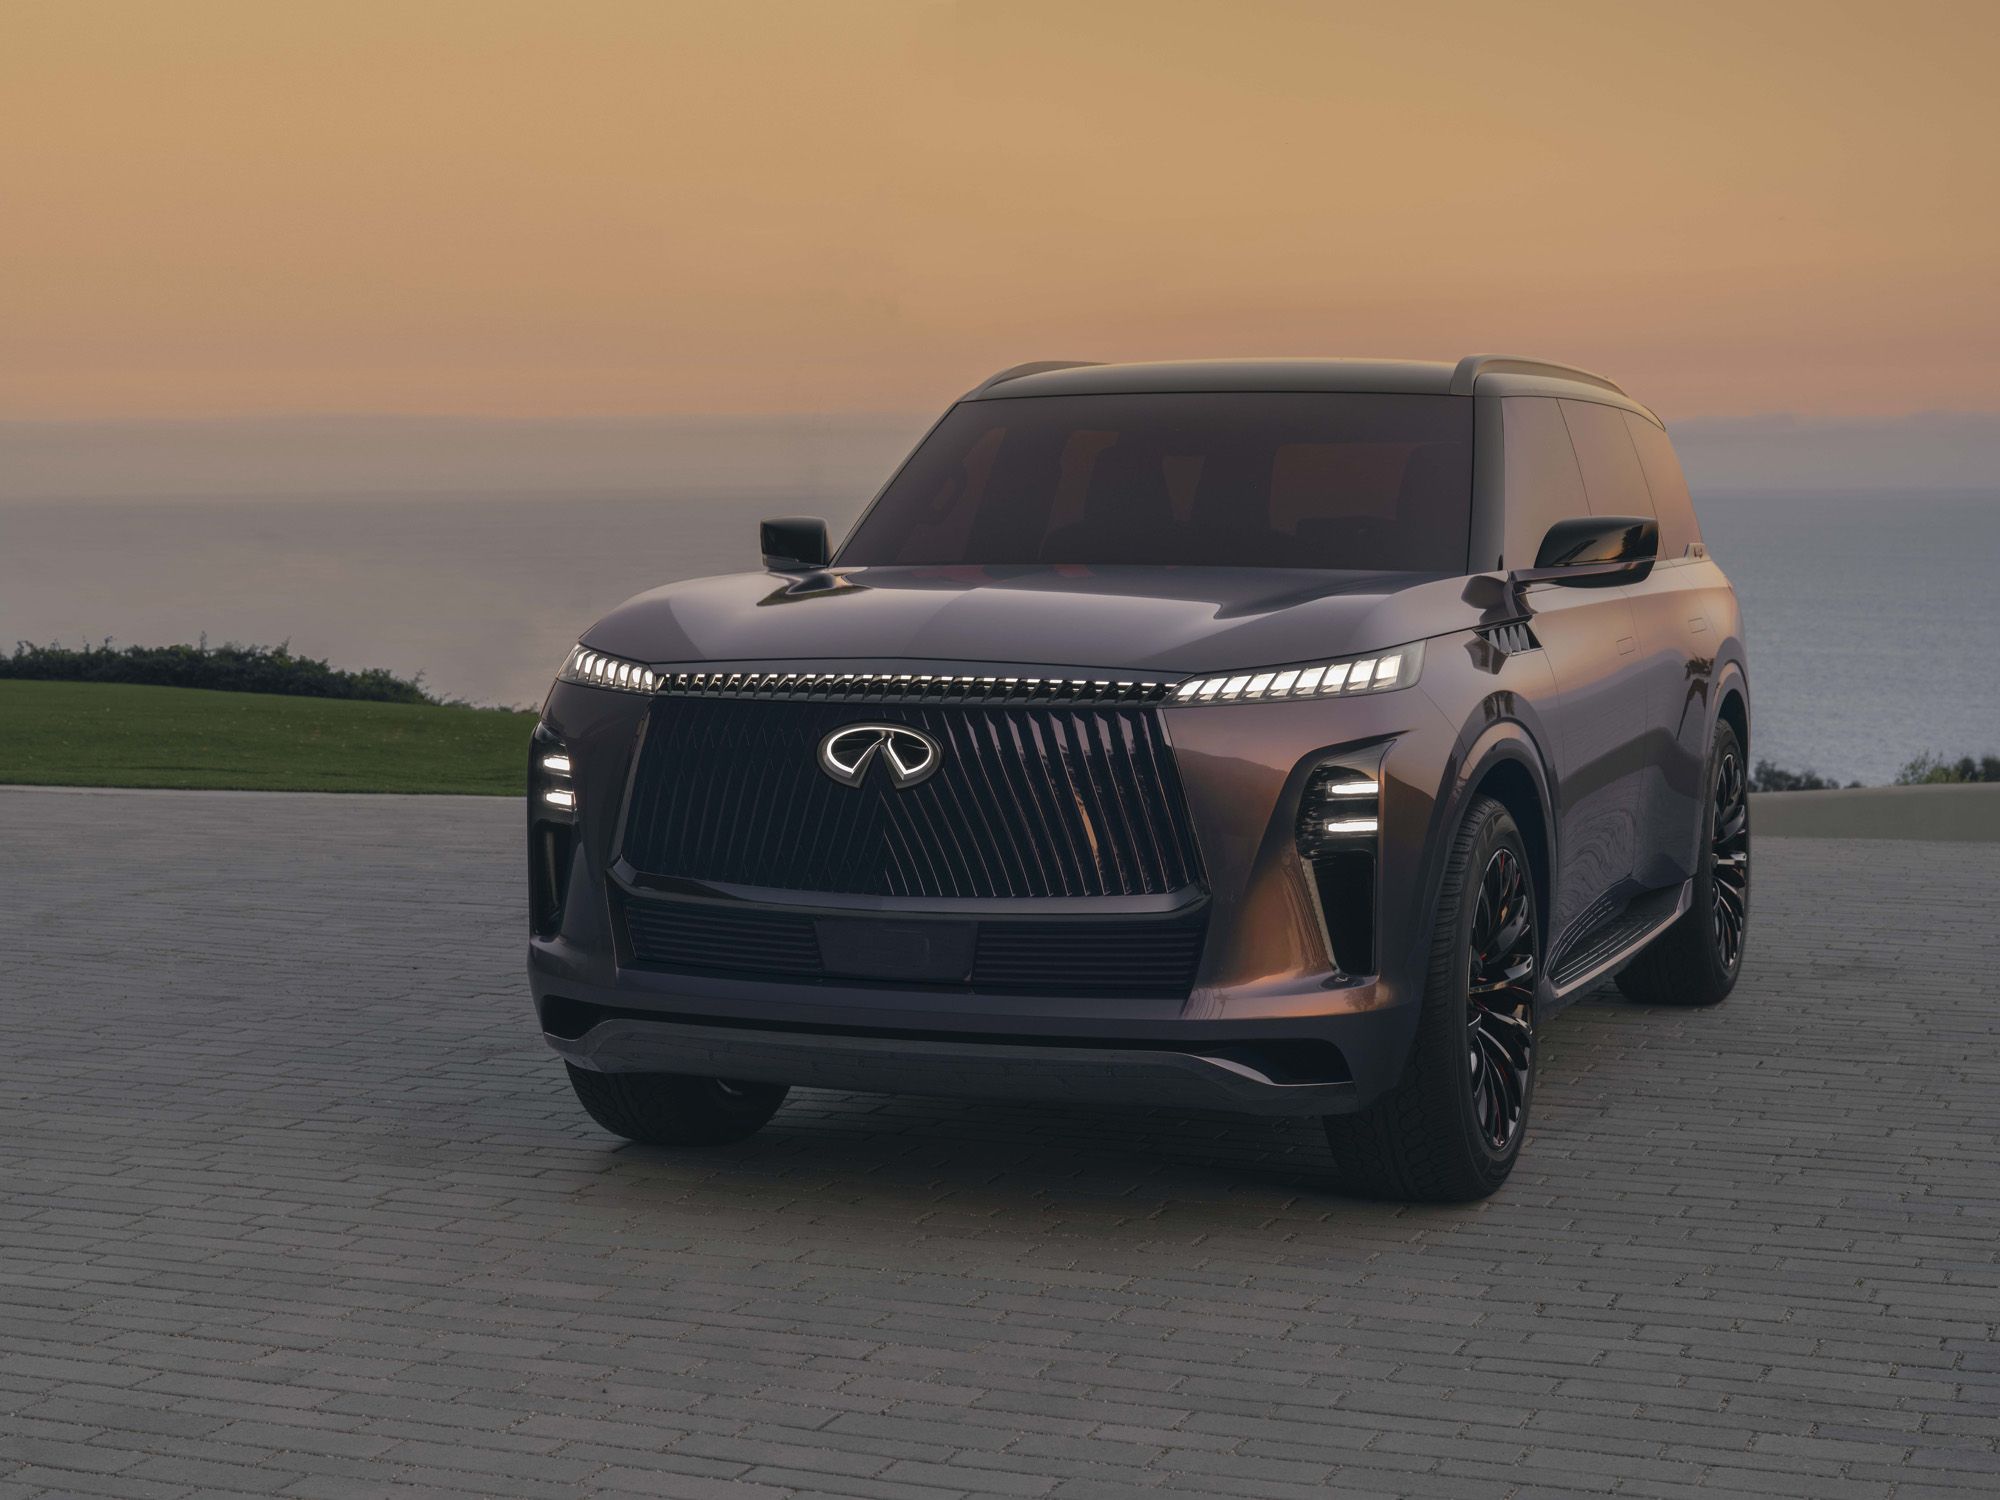 The 2025 Infiniti QX80 to Receive Upgraded V6 Engine with Nissan GT-R Influence